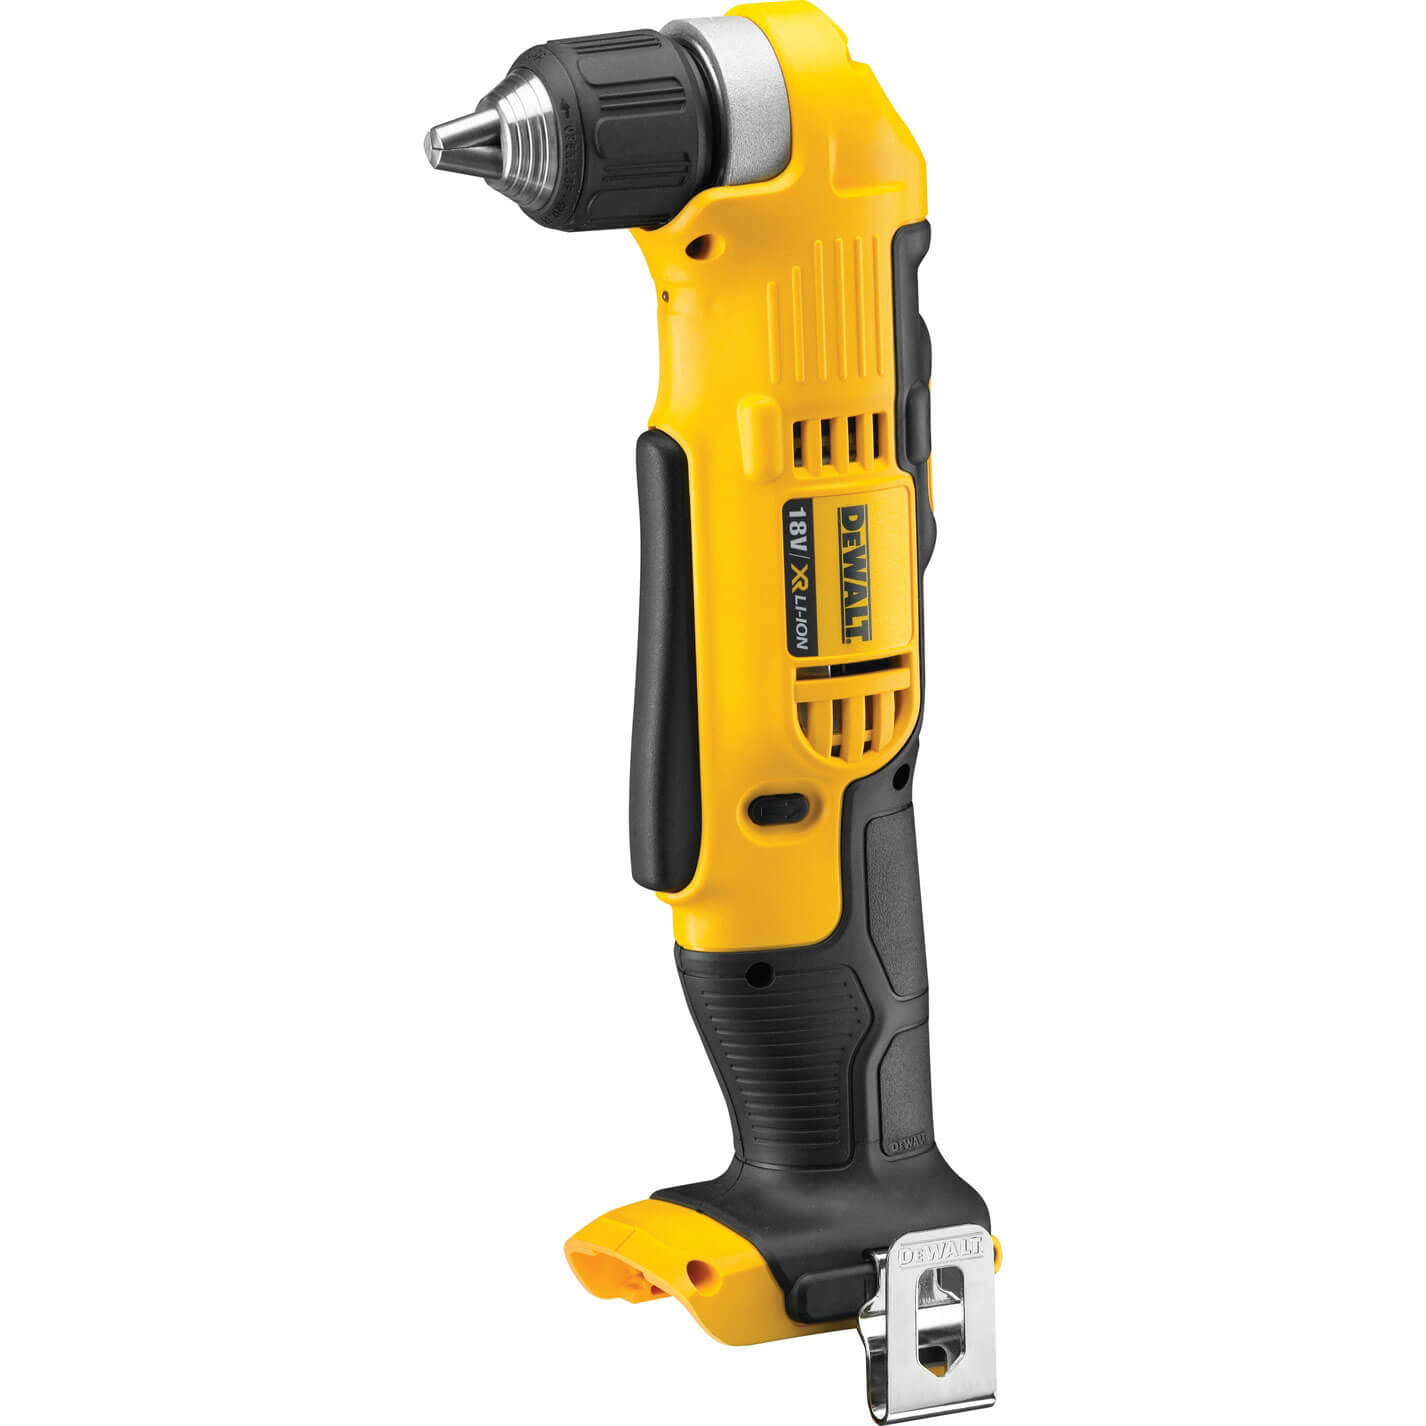 Image of DeWalt DCD740 18v XR Cordless Right Angle Drill No Batteries No Charger No Case